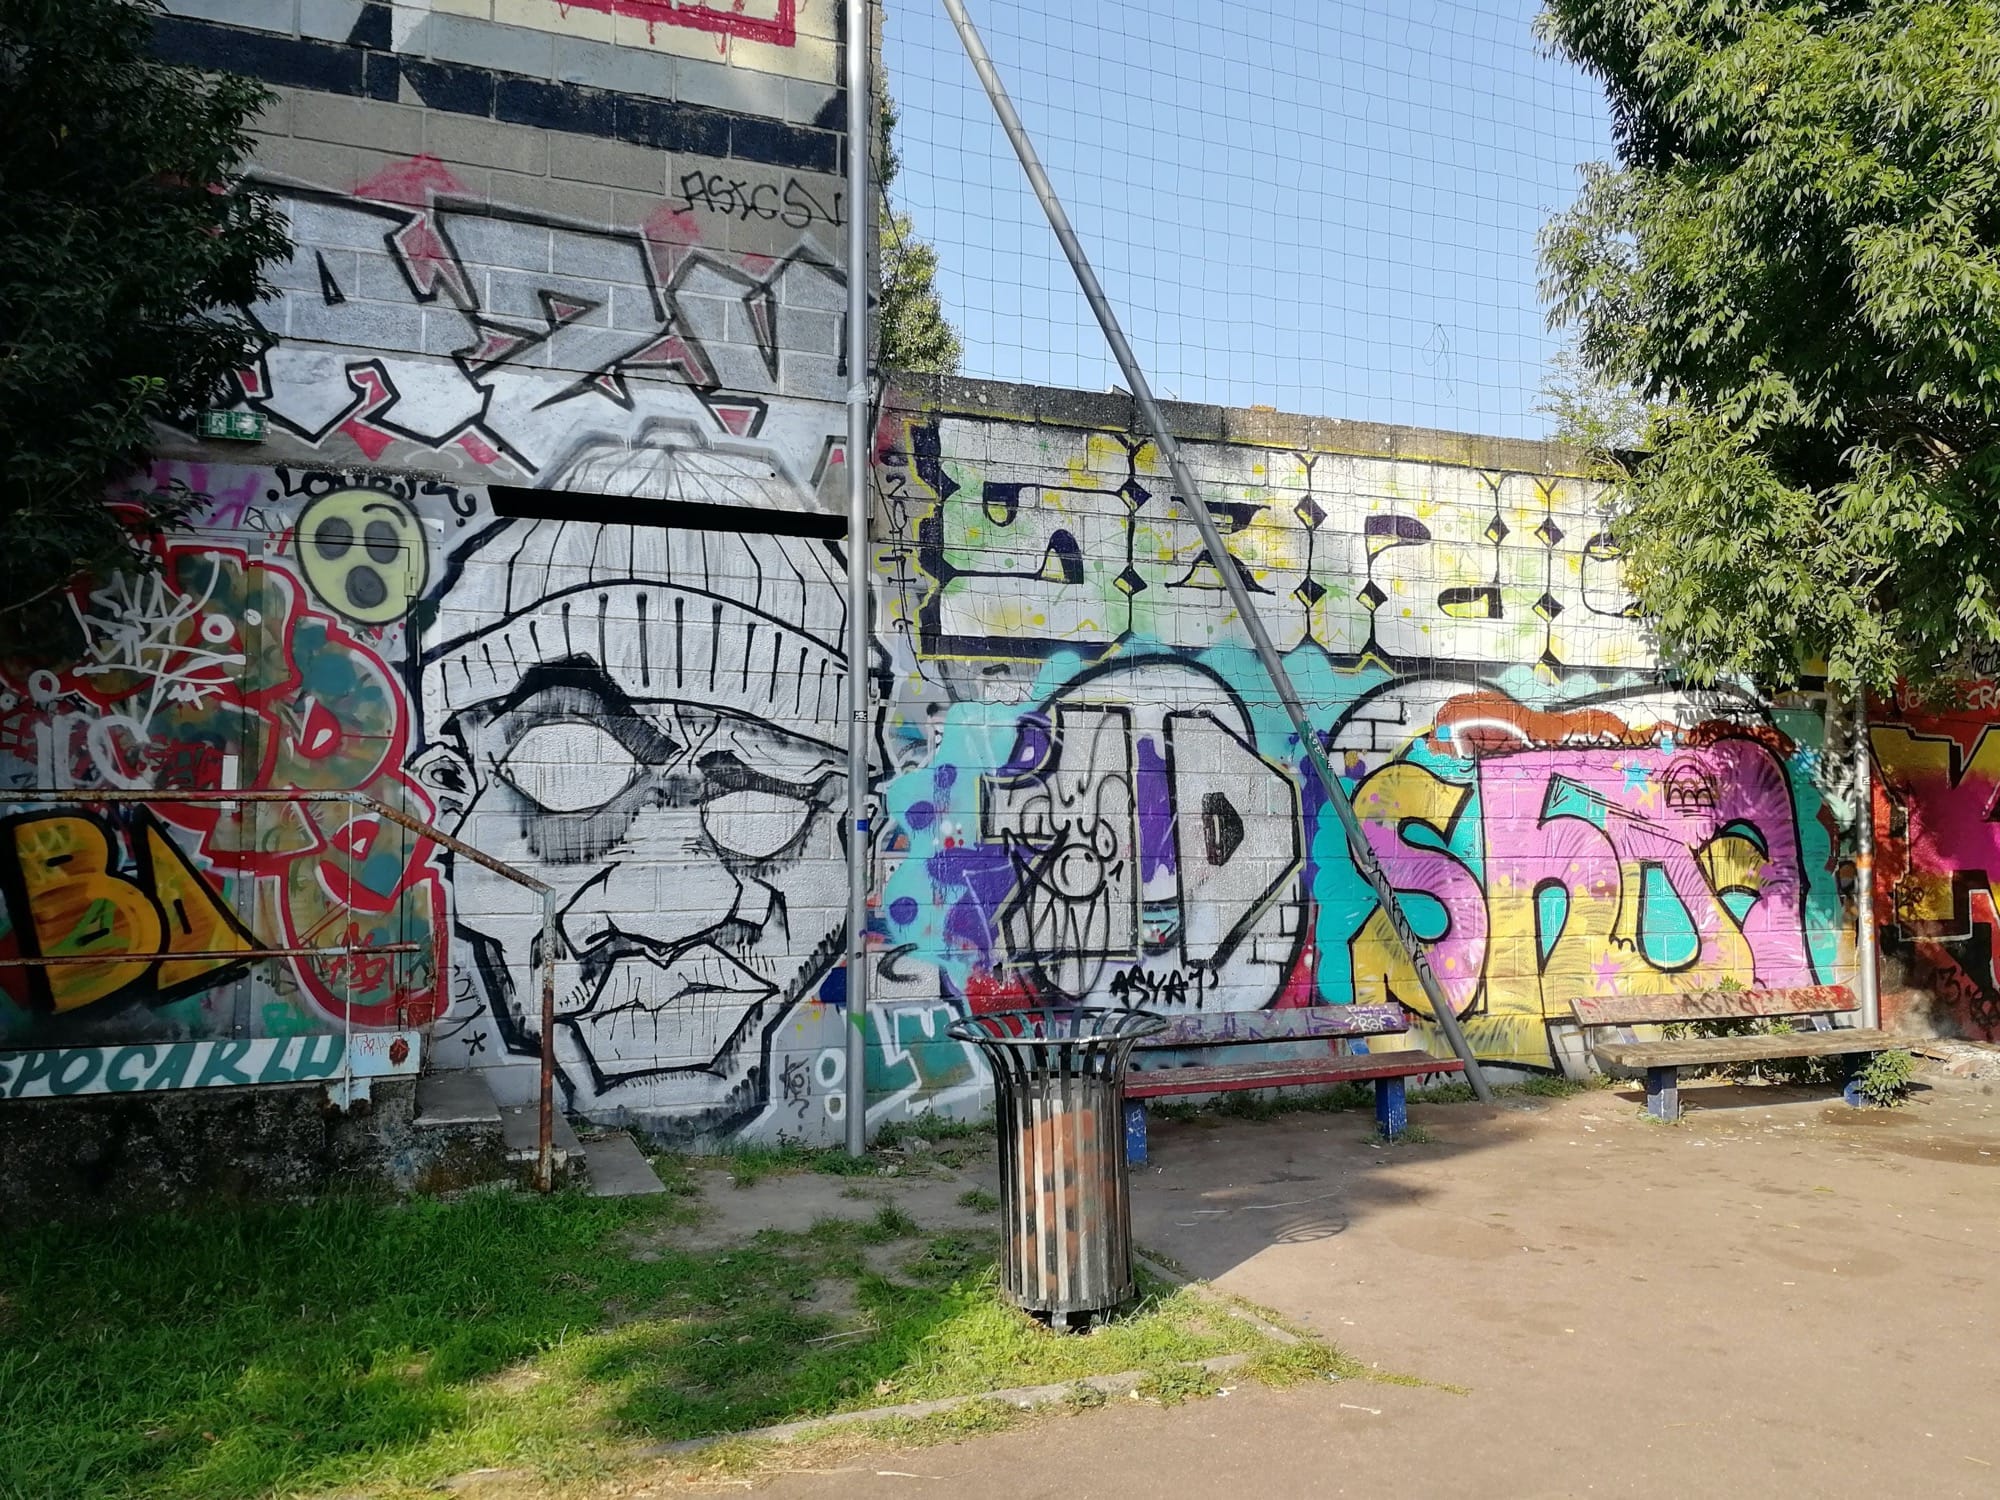 Graffiti 4375  captured by Rabot in Nantes France